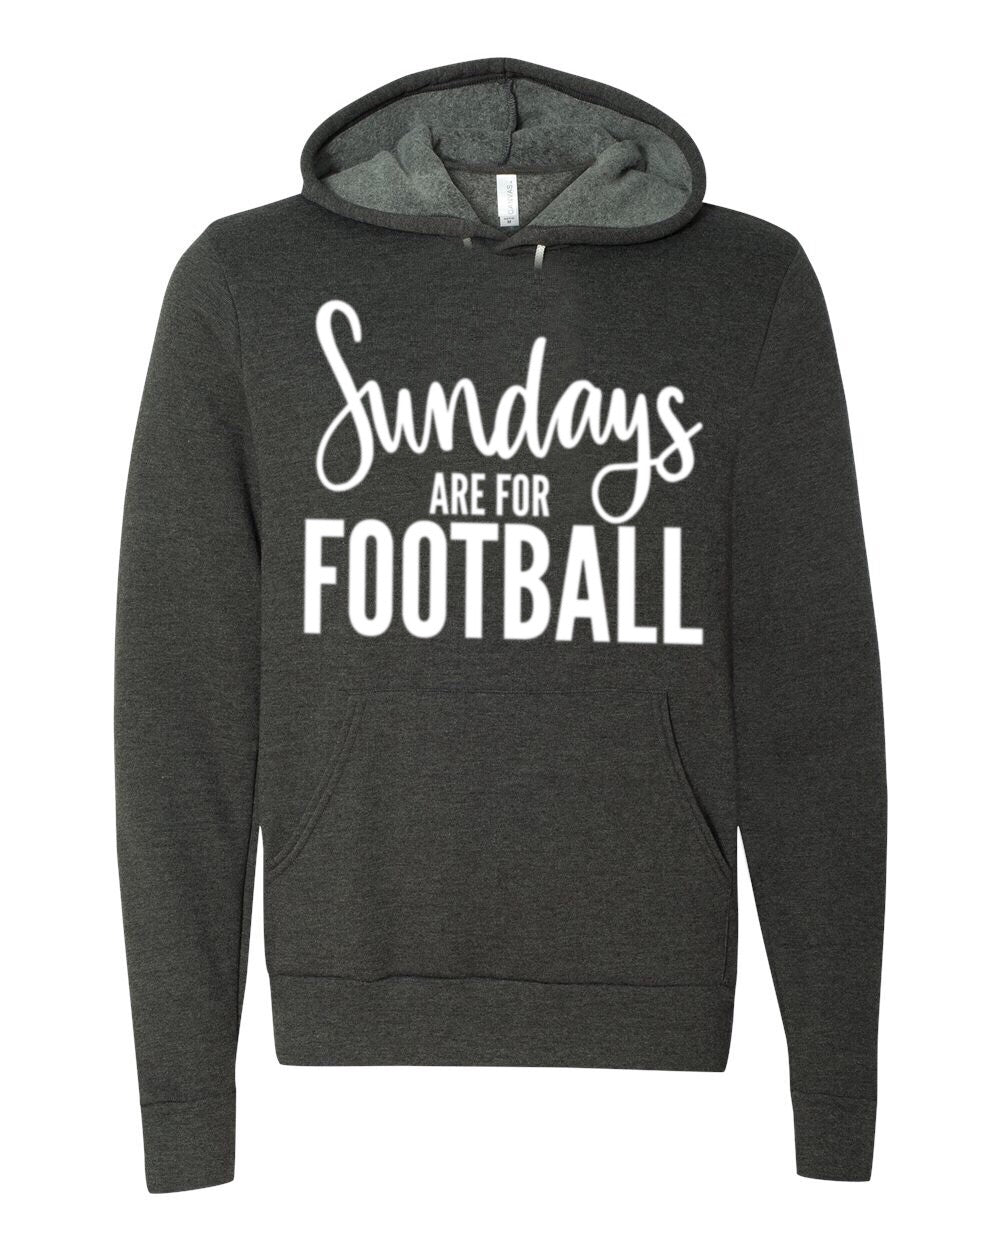 Sunday’s Are For Football Unisex Hoodie